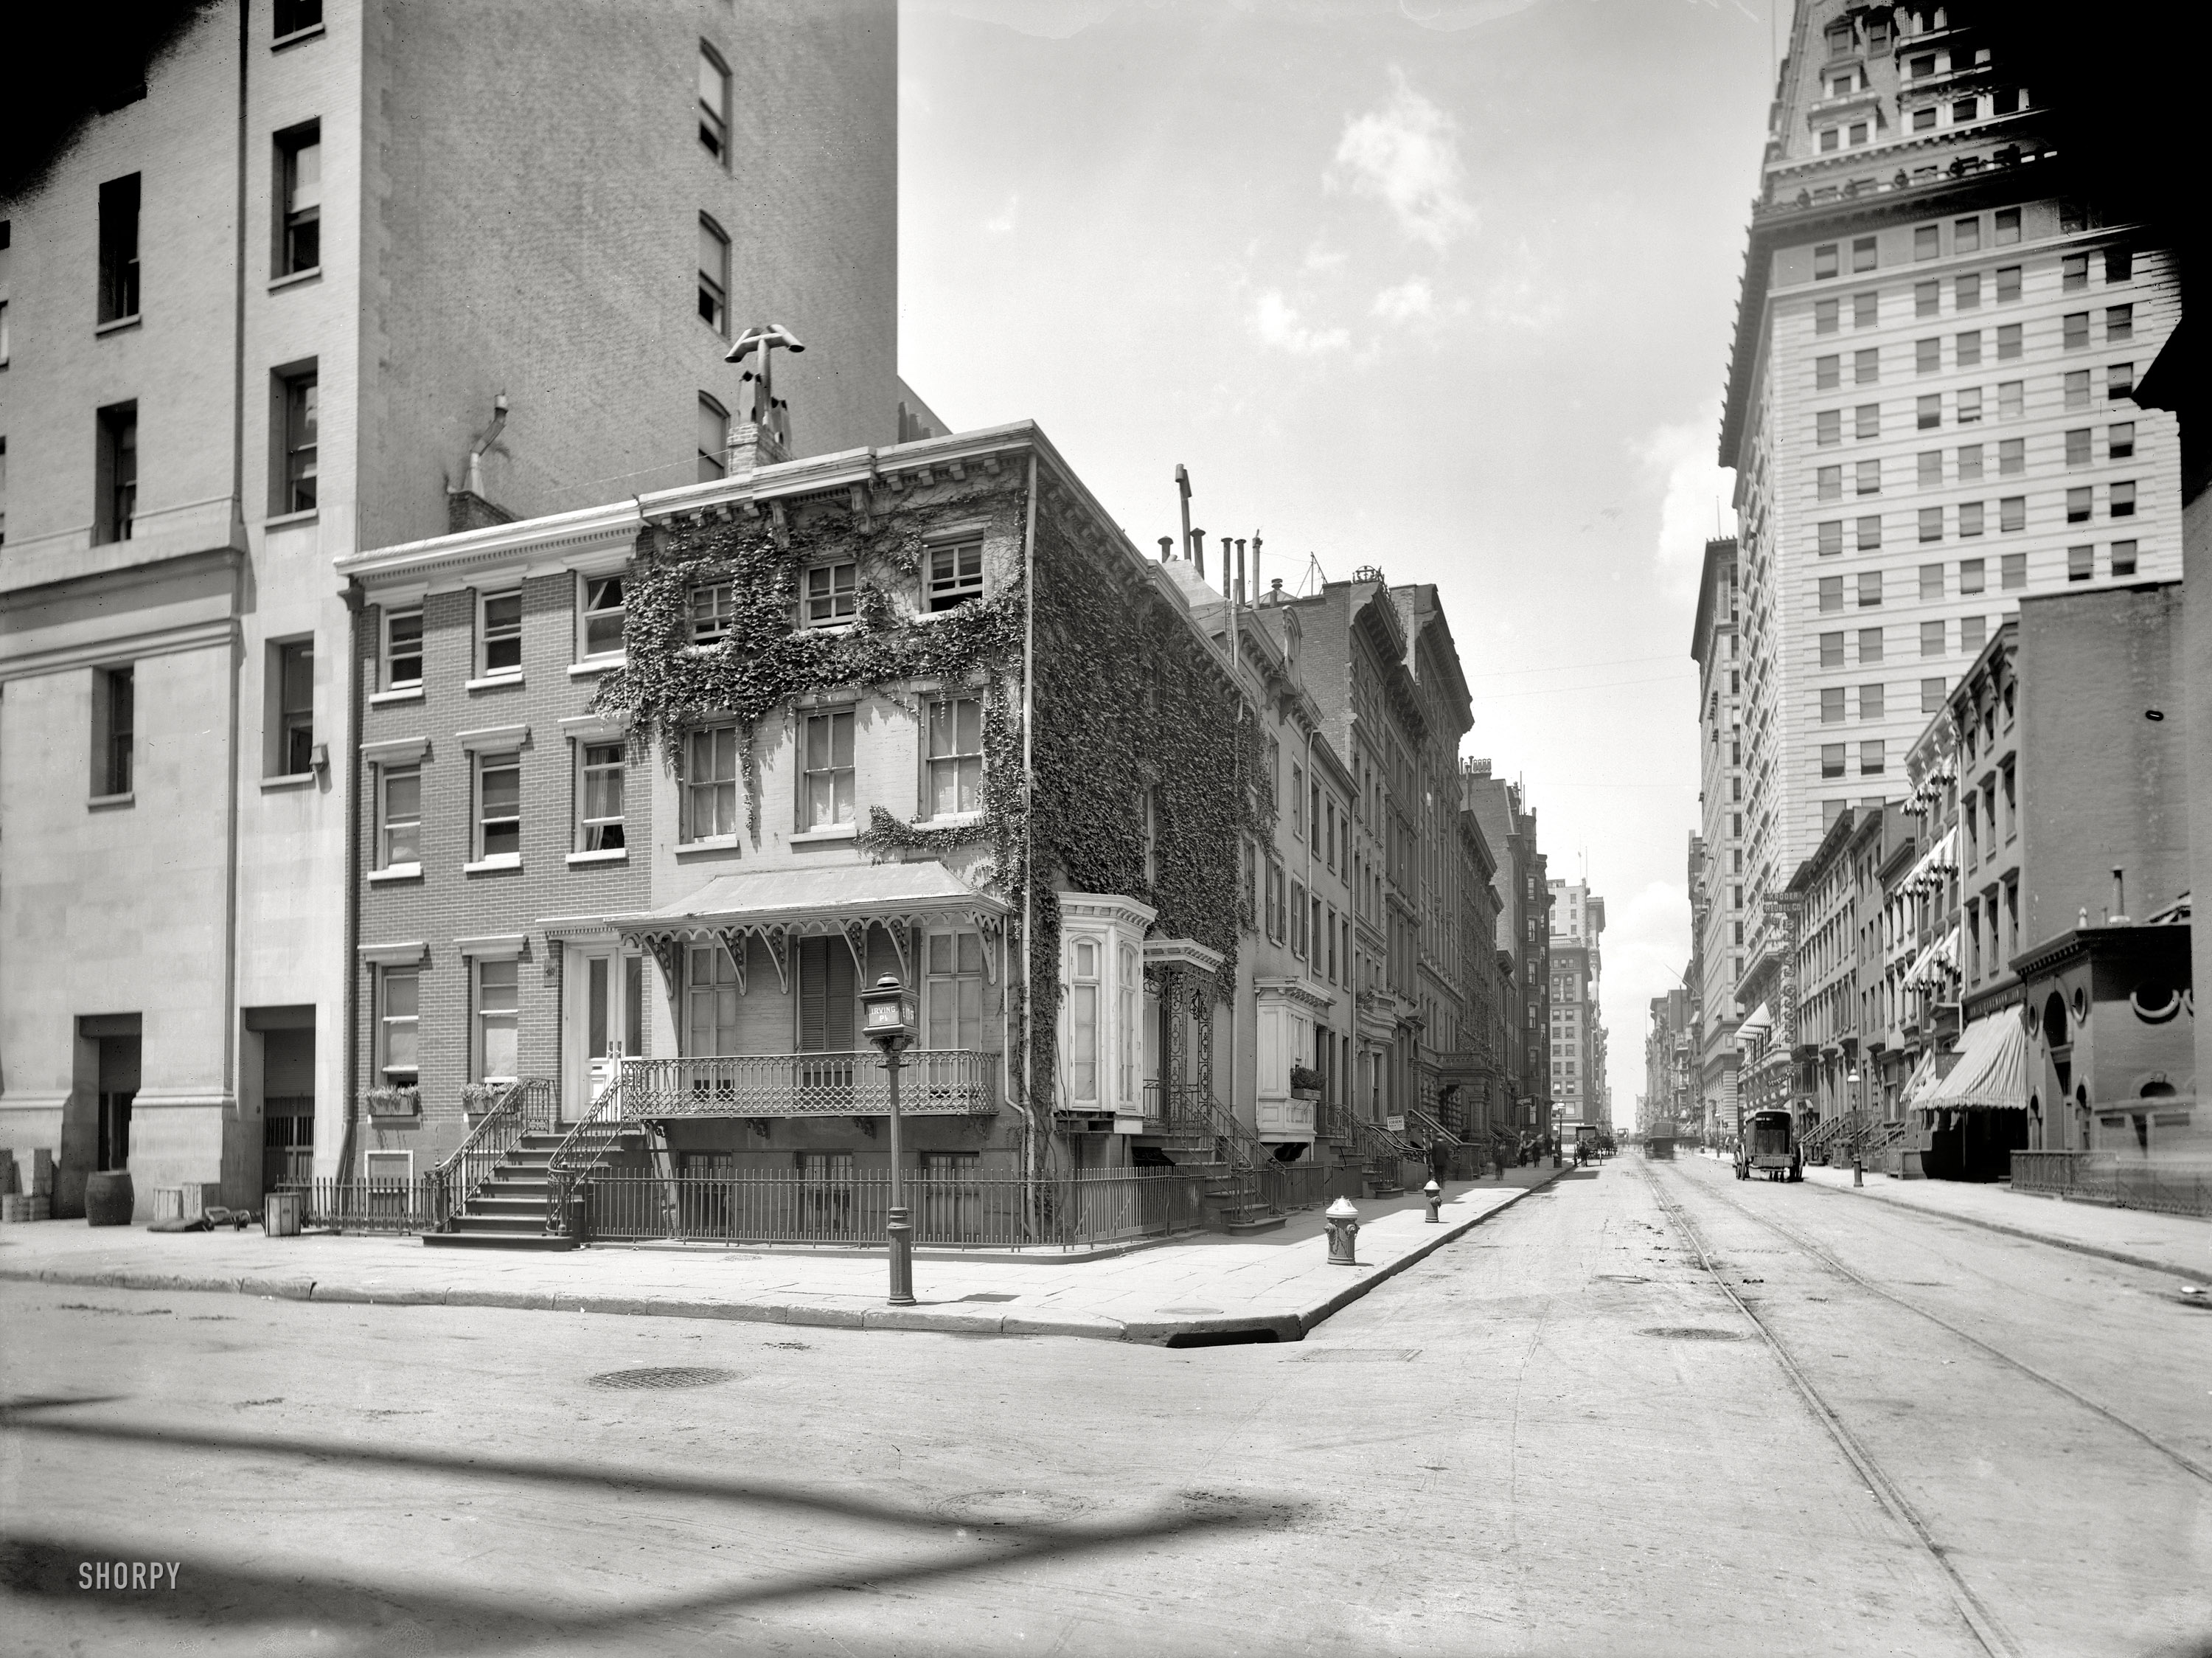 New York circa 1905. "Washington Irving's home, Irving Place and East 17th Street." Where Rip Van Winkle meets Sleepy Hollow. 8x10 inch dry plate glass negative, Detroit Publishing Company. View full size.